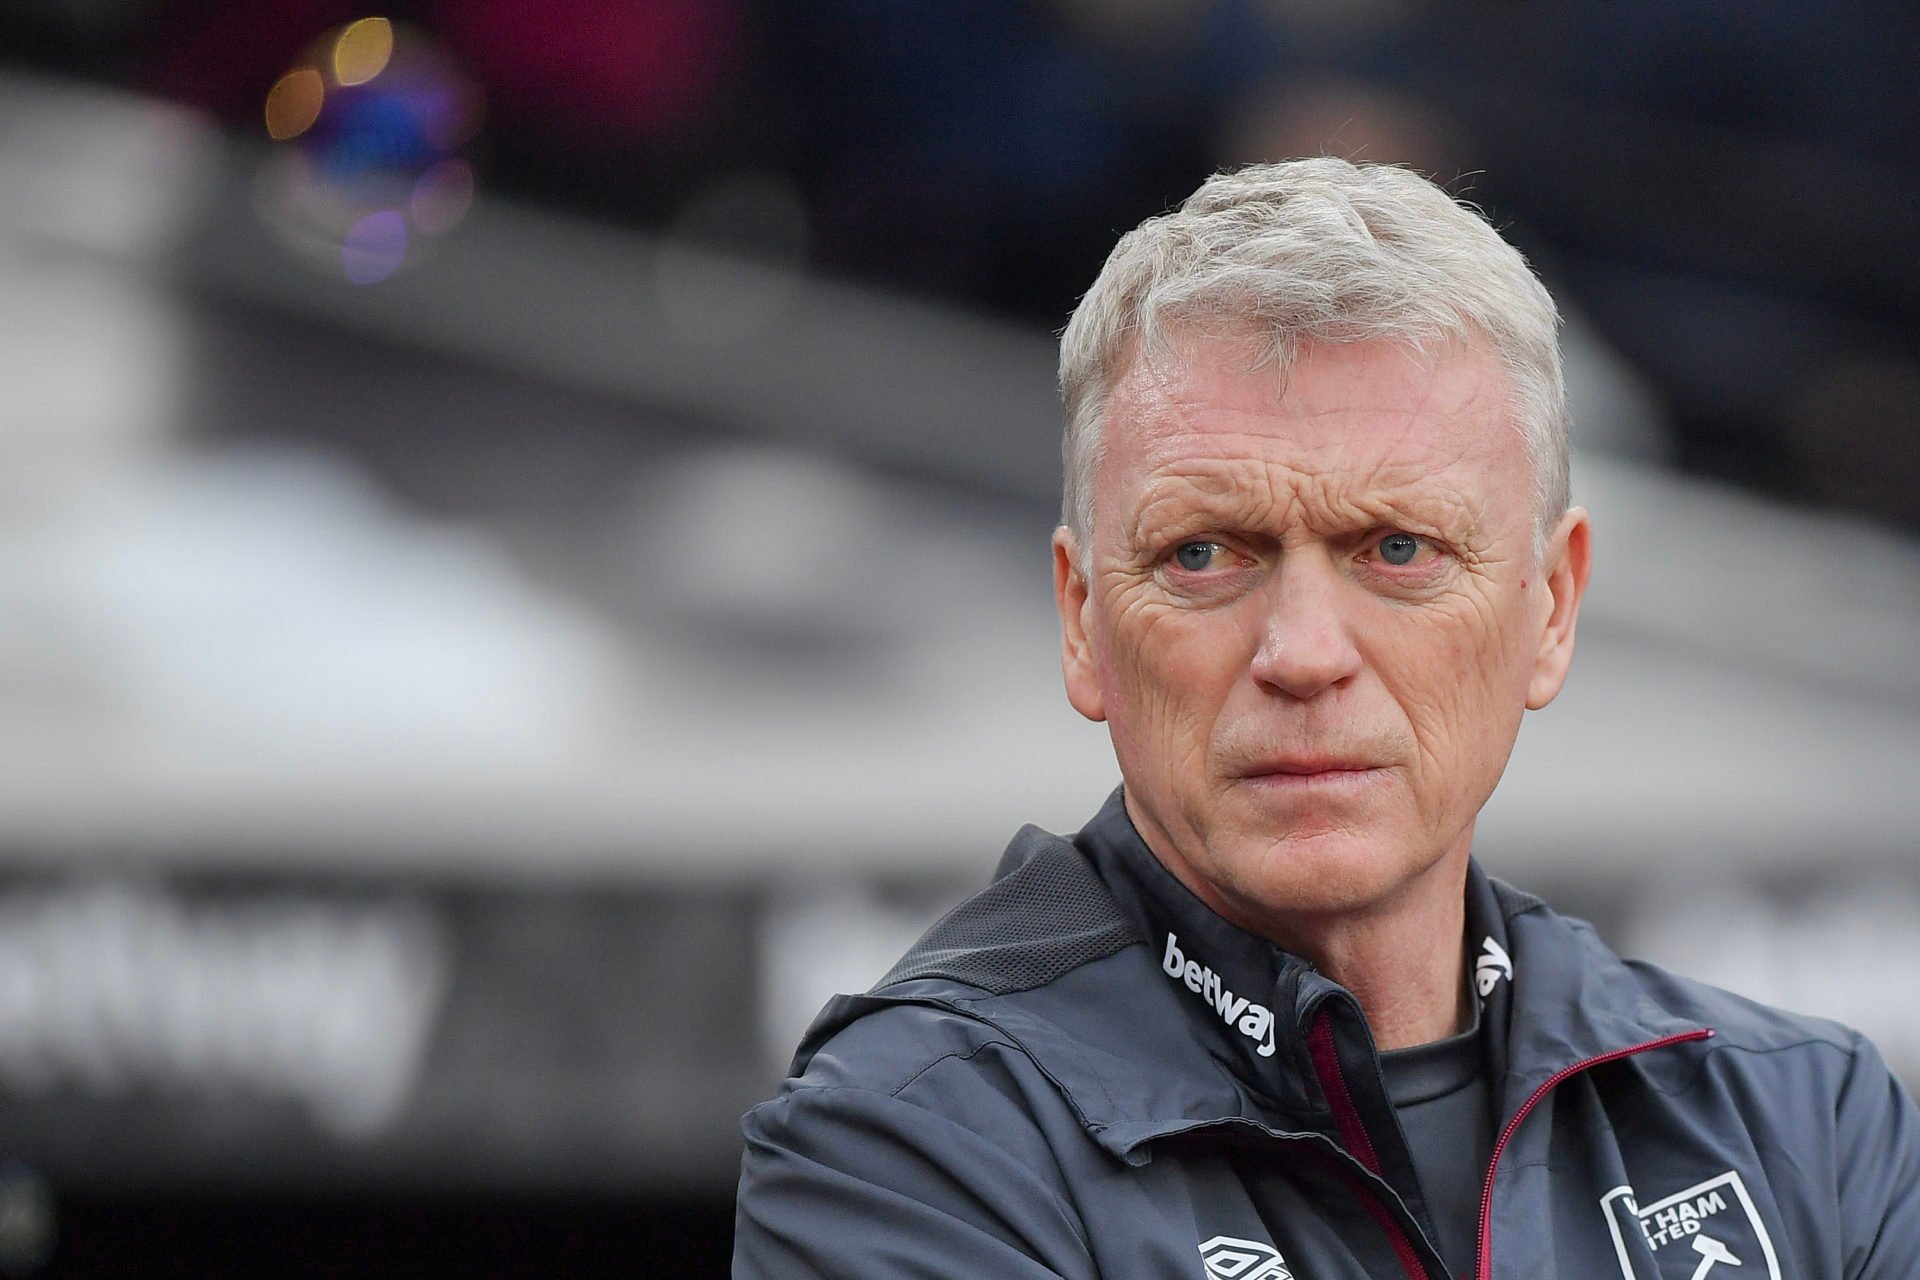 David Moyes drops big hint about who is to blame for boring West Ham football